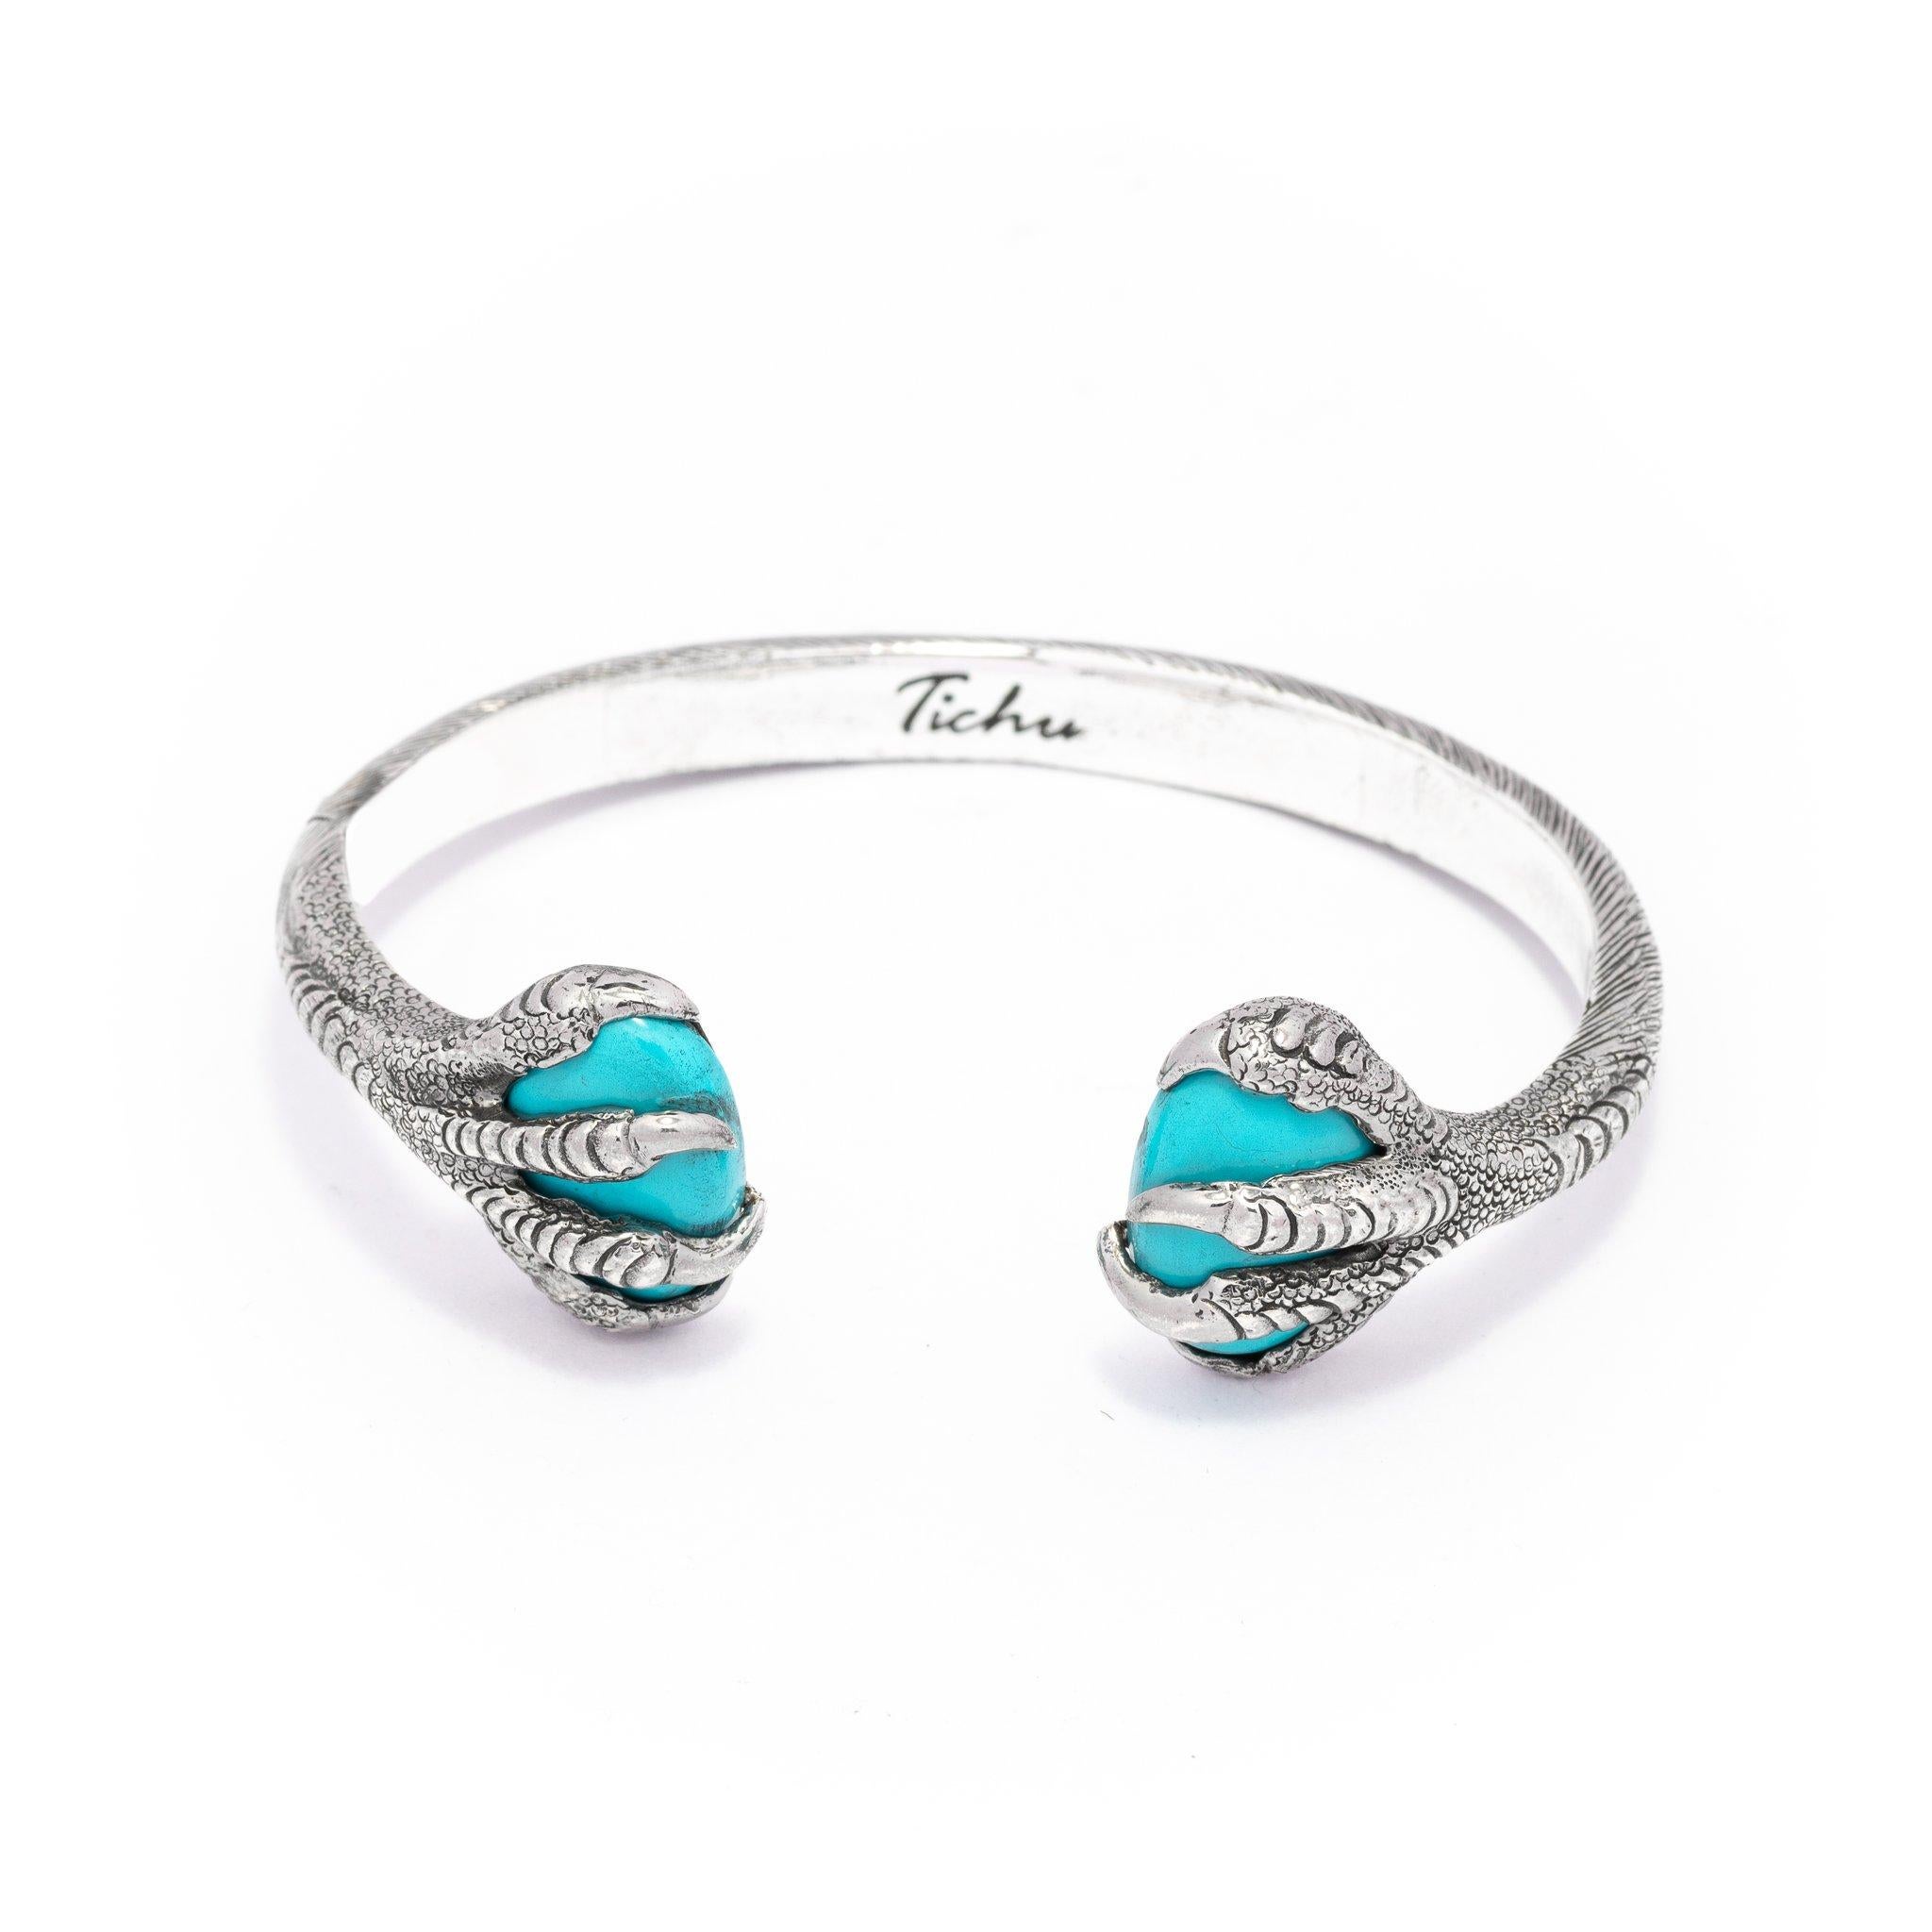 Cabochon Tichu Turquoise Eagle Claw Cuff in Silver Sterling & Crystal Quartz, Size 'M' For Sale